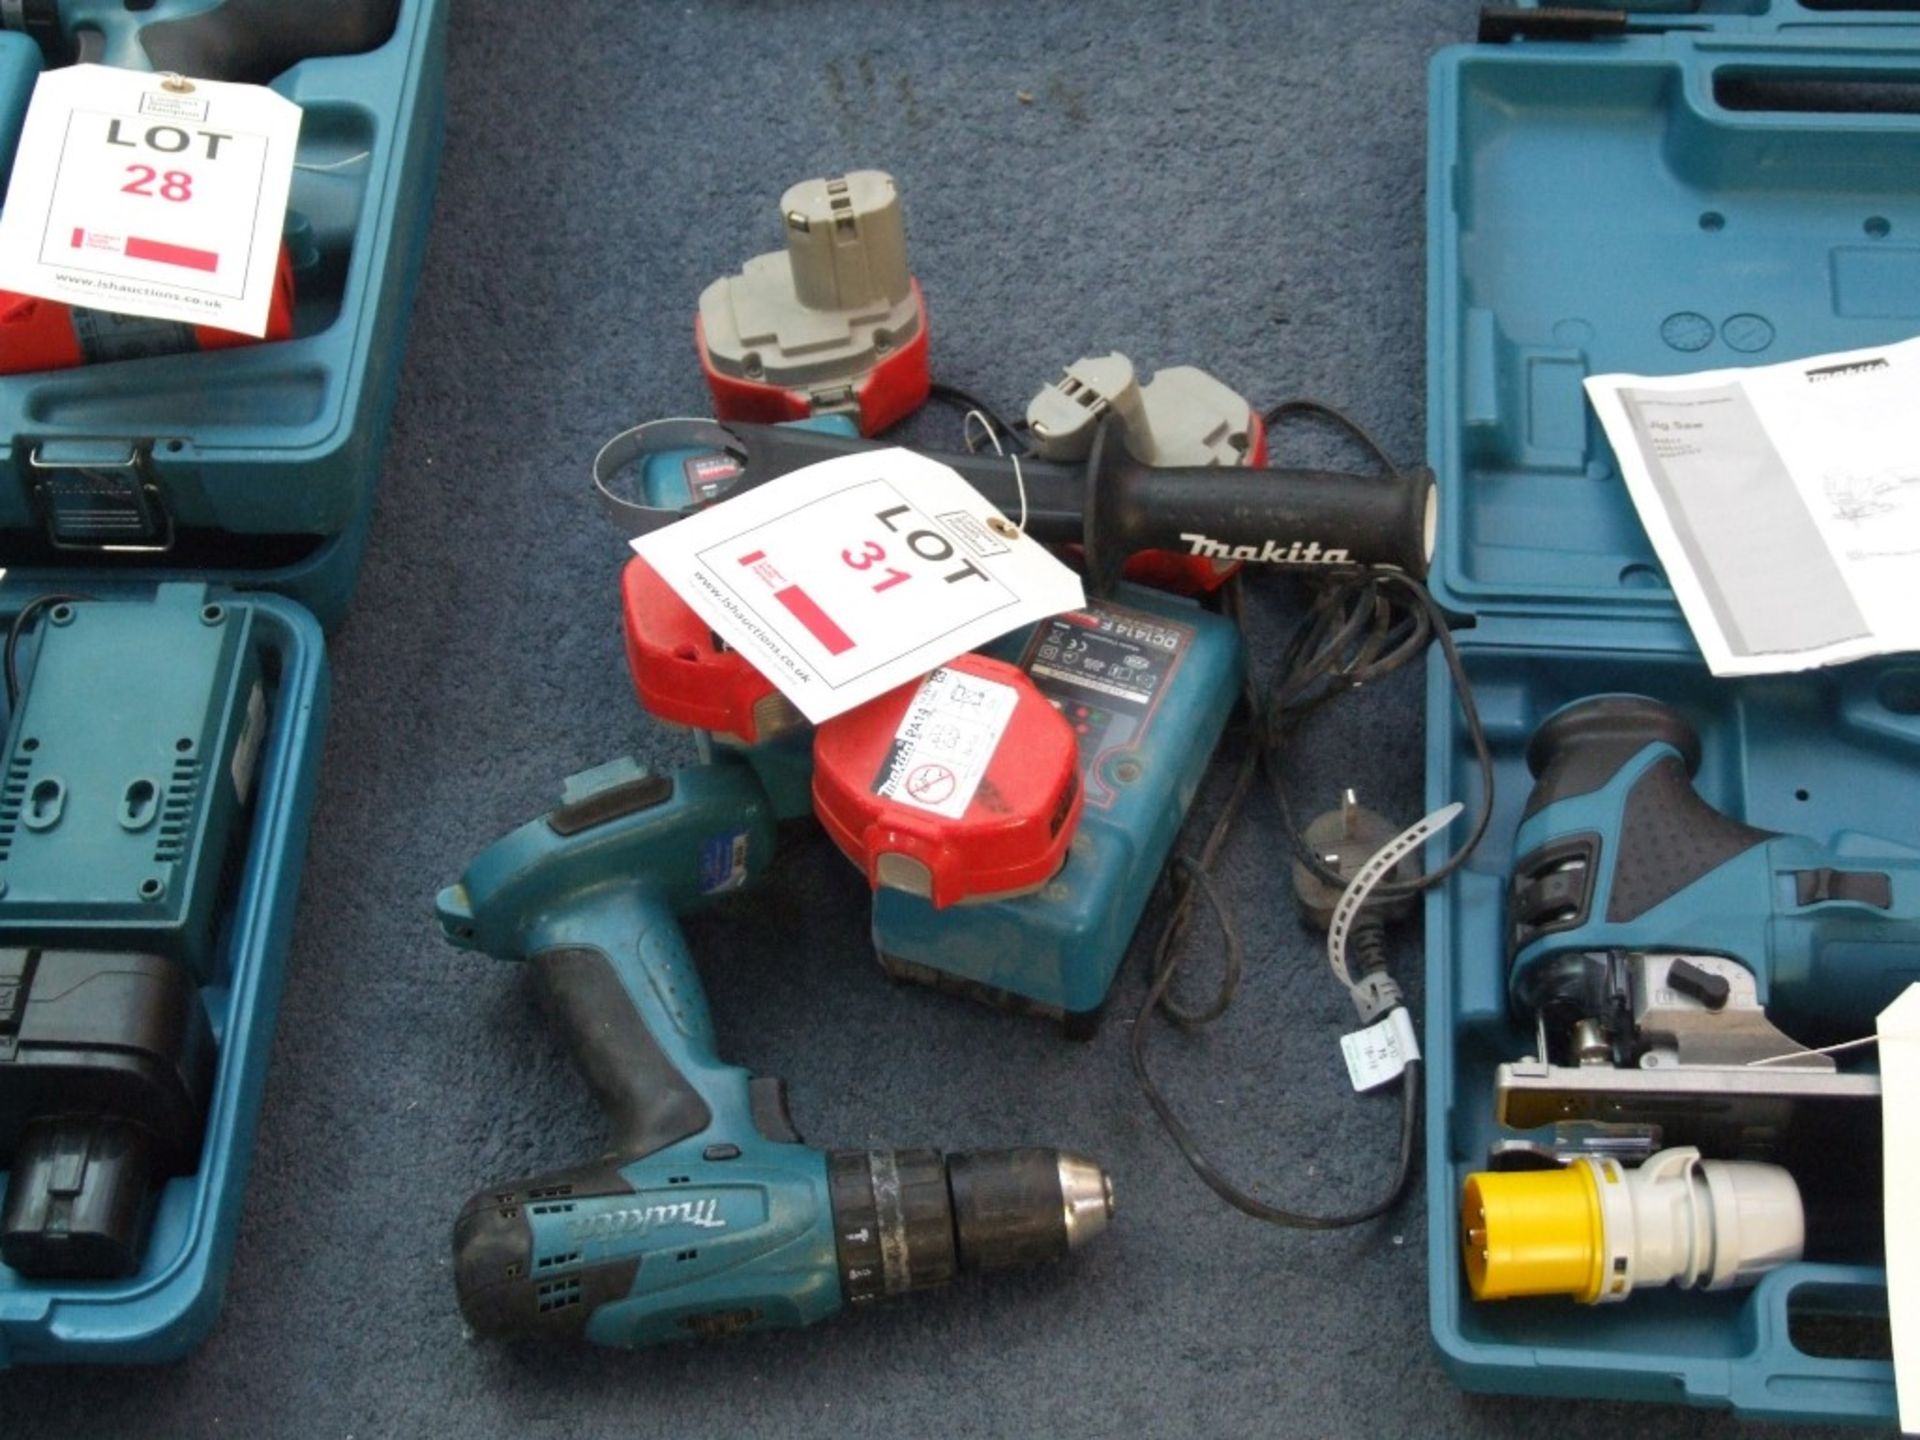 Makita Items consisting of 2 x DC1414F Chargers, 4 x PA14 Batteries, Cordless Drill, etc